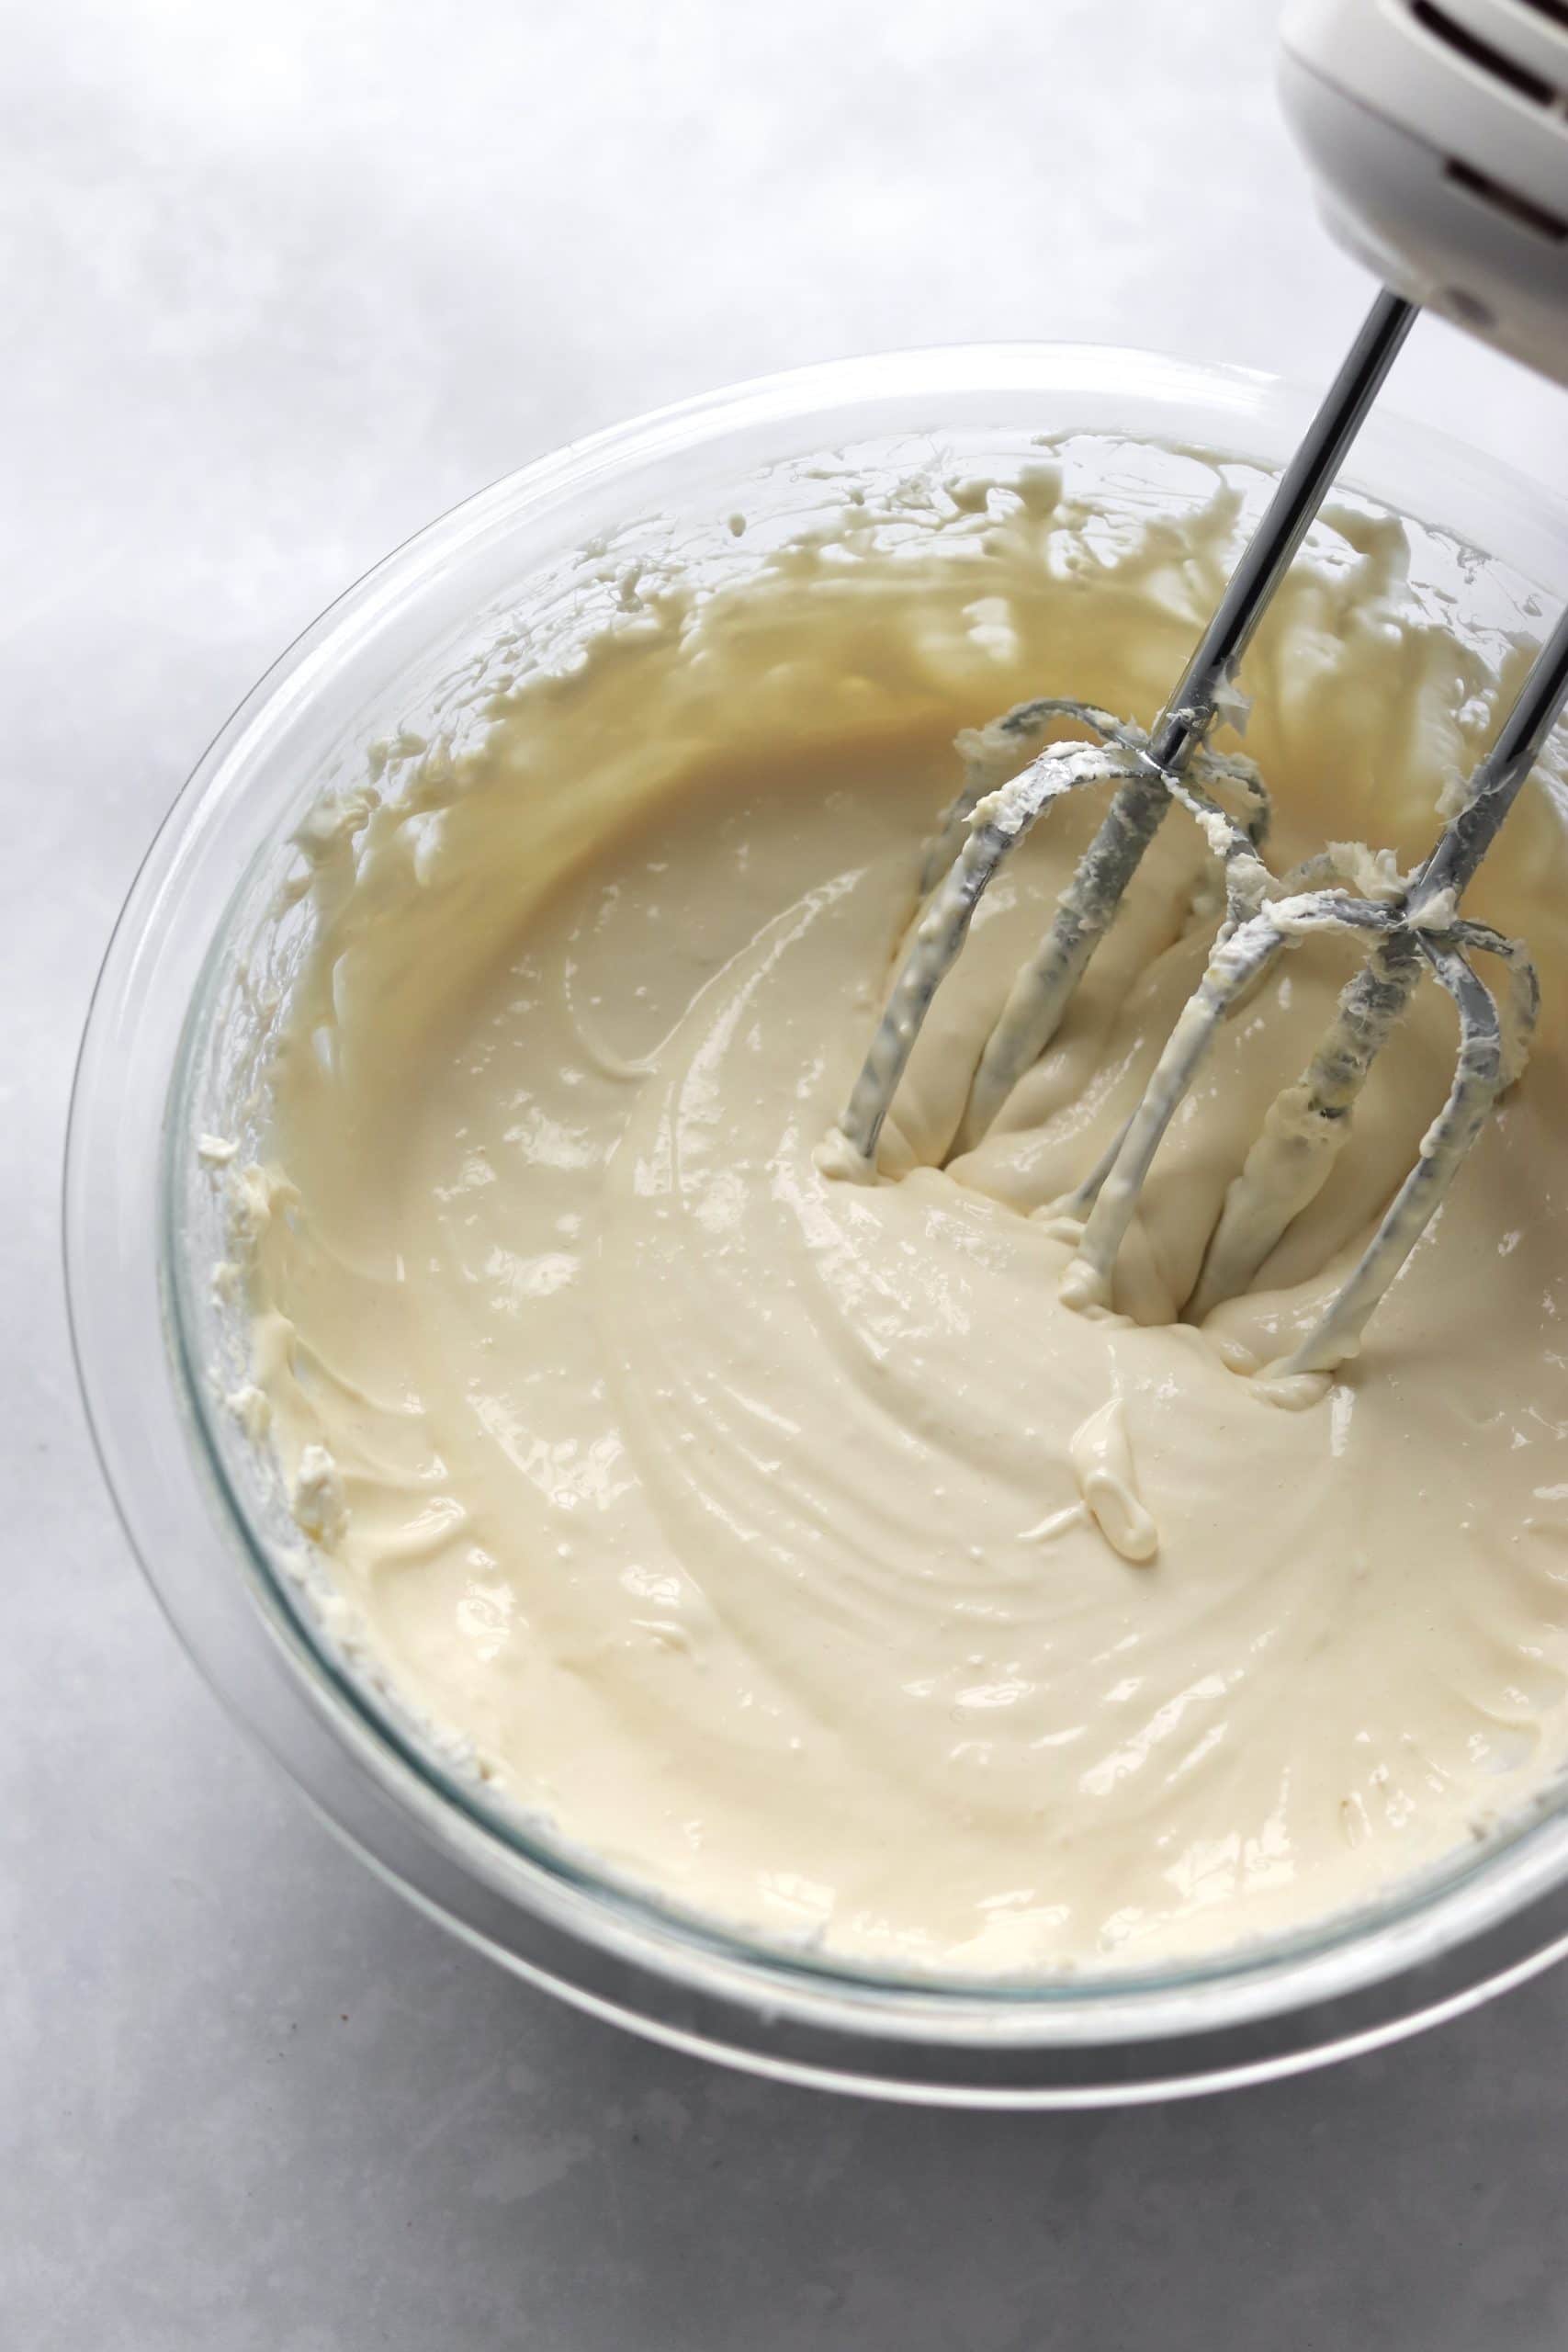 Cheesecake batter in a bowl with a hand mixer